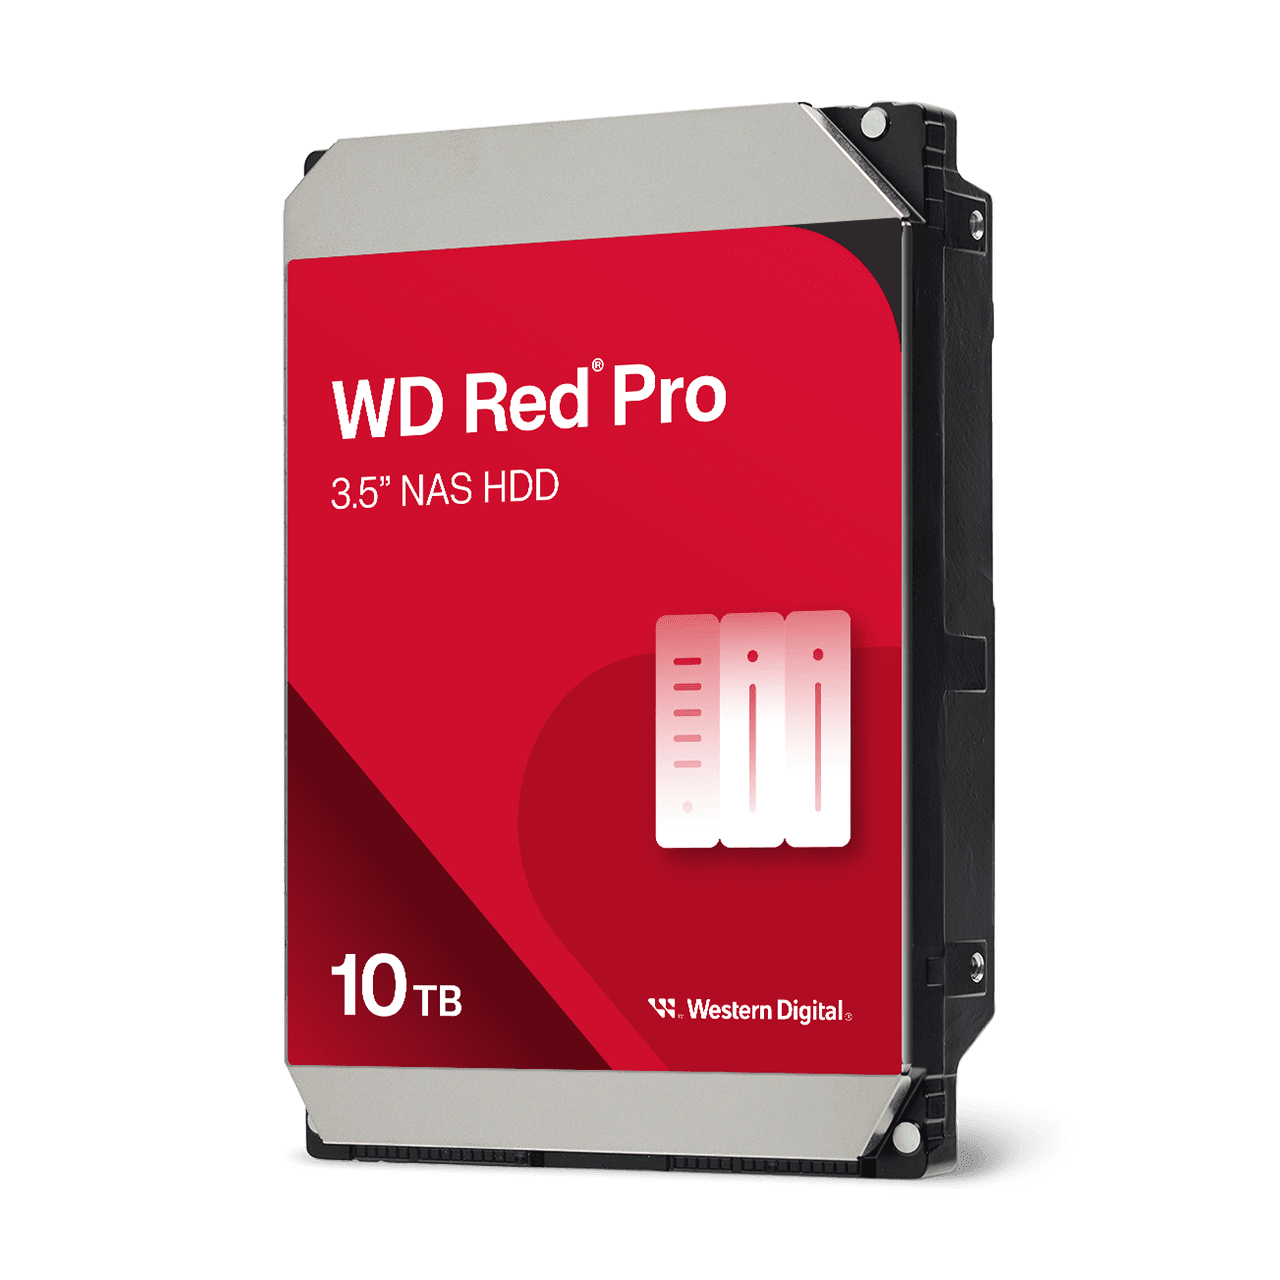 WD Red™ Pro 10TB NAS Hard Drive - Image5